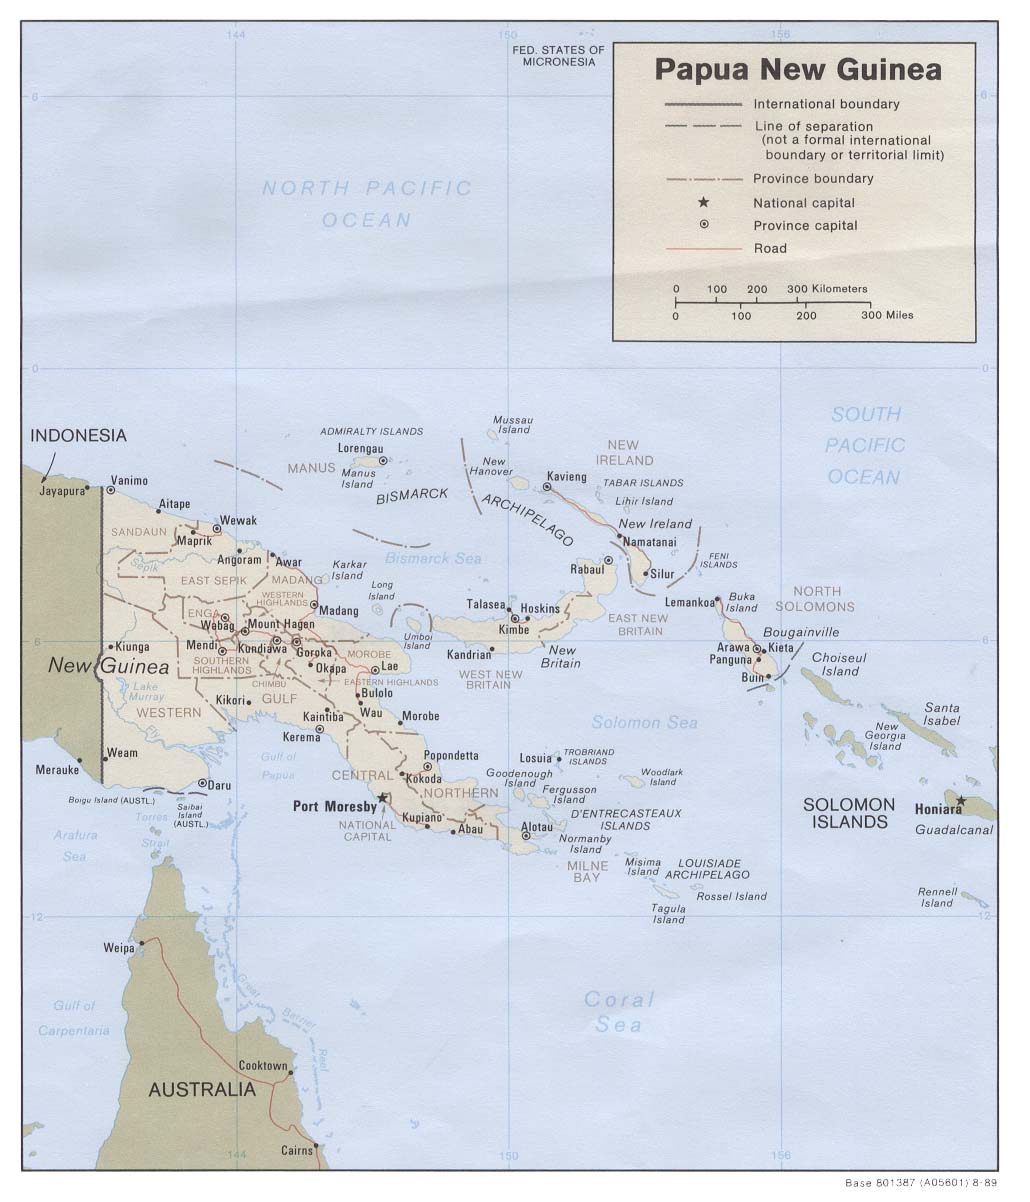 Download this Papua New Guinea Maps picture